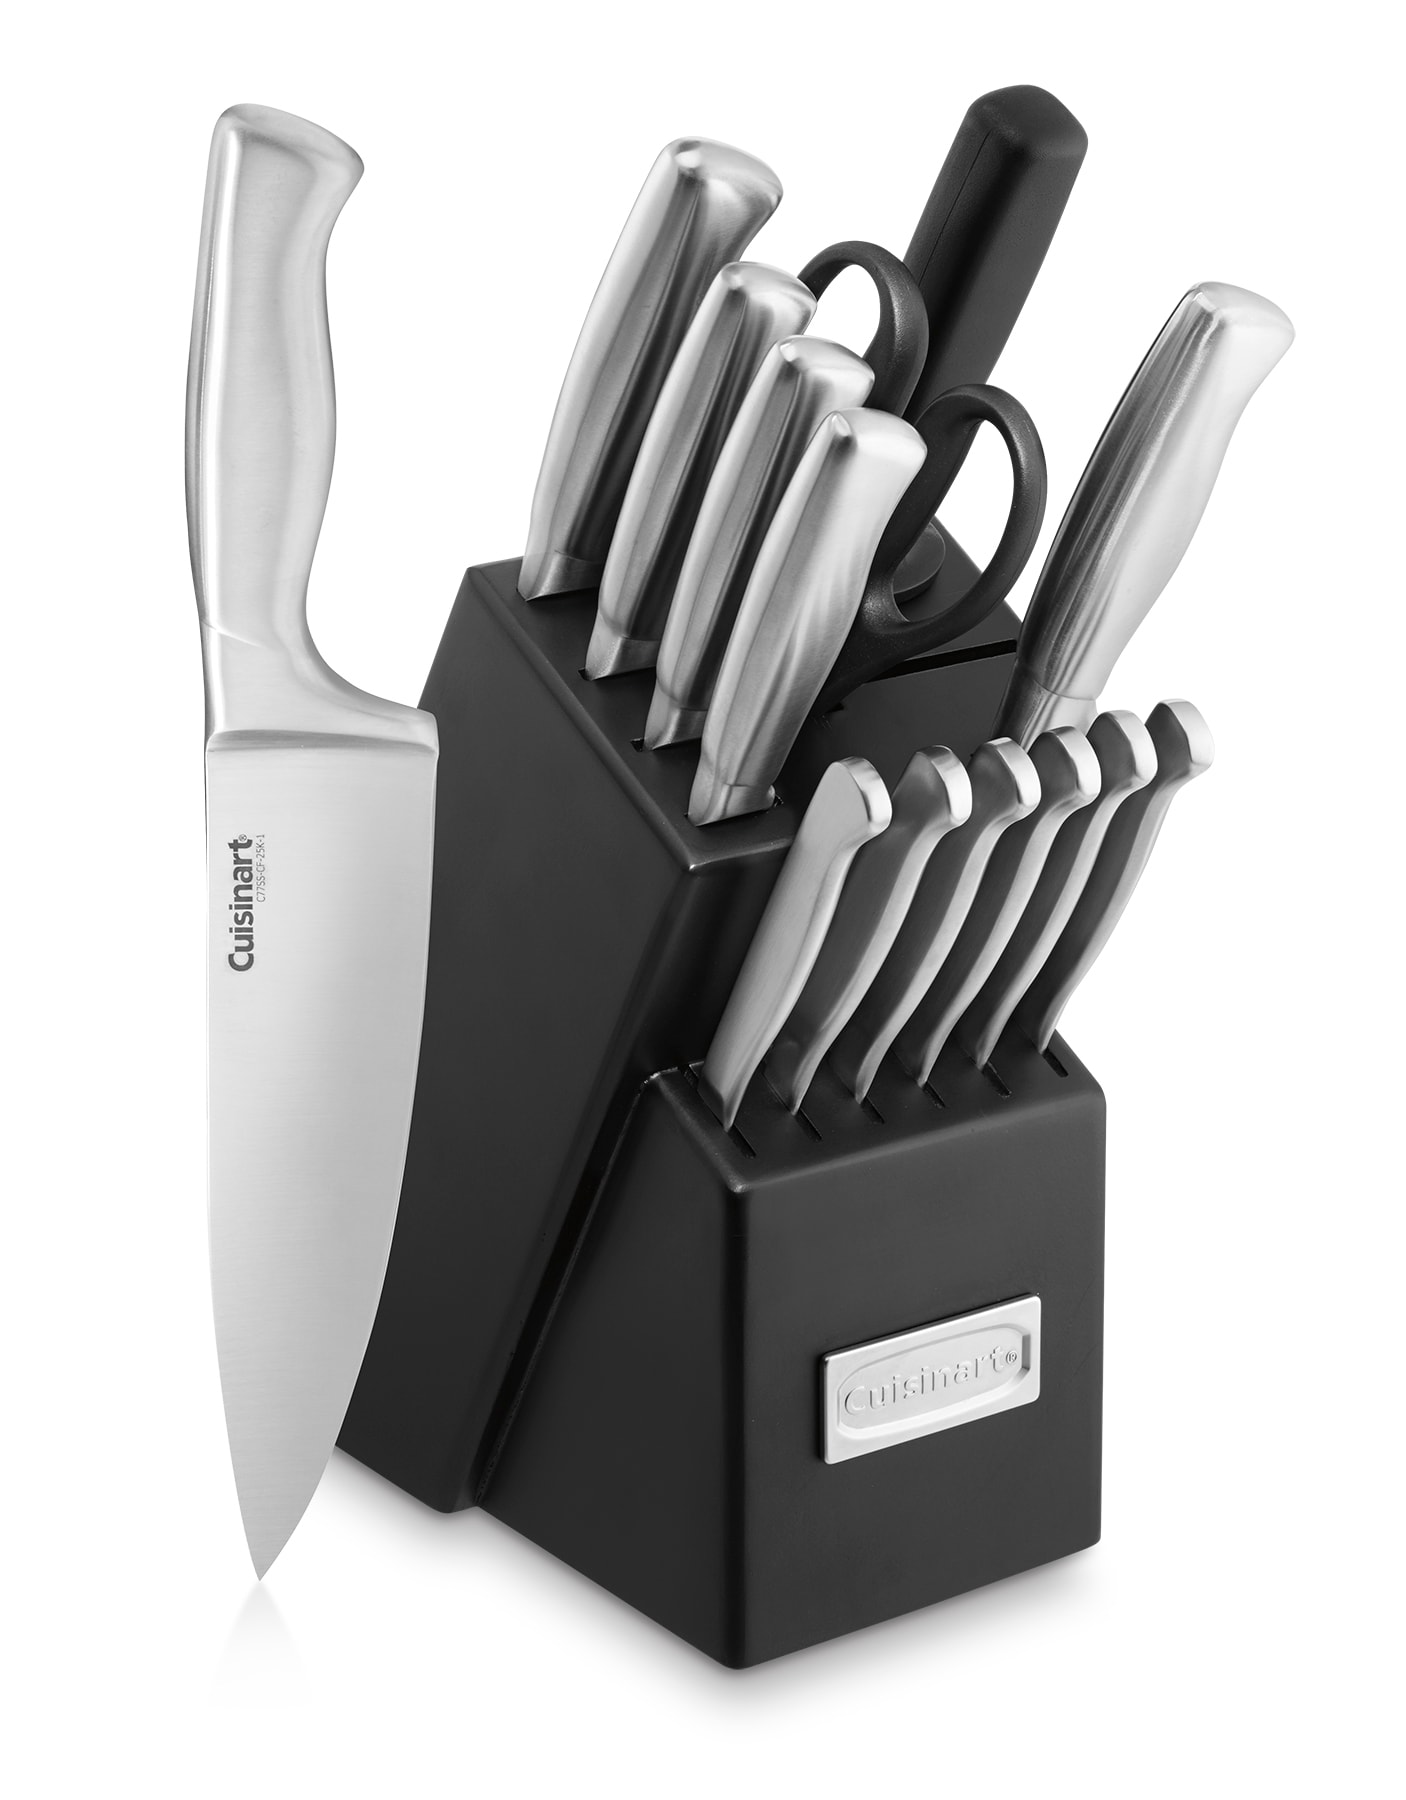 Knife Set, 15 Pieces Stainless Steel Kitchen Knives with Gray